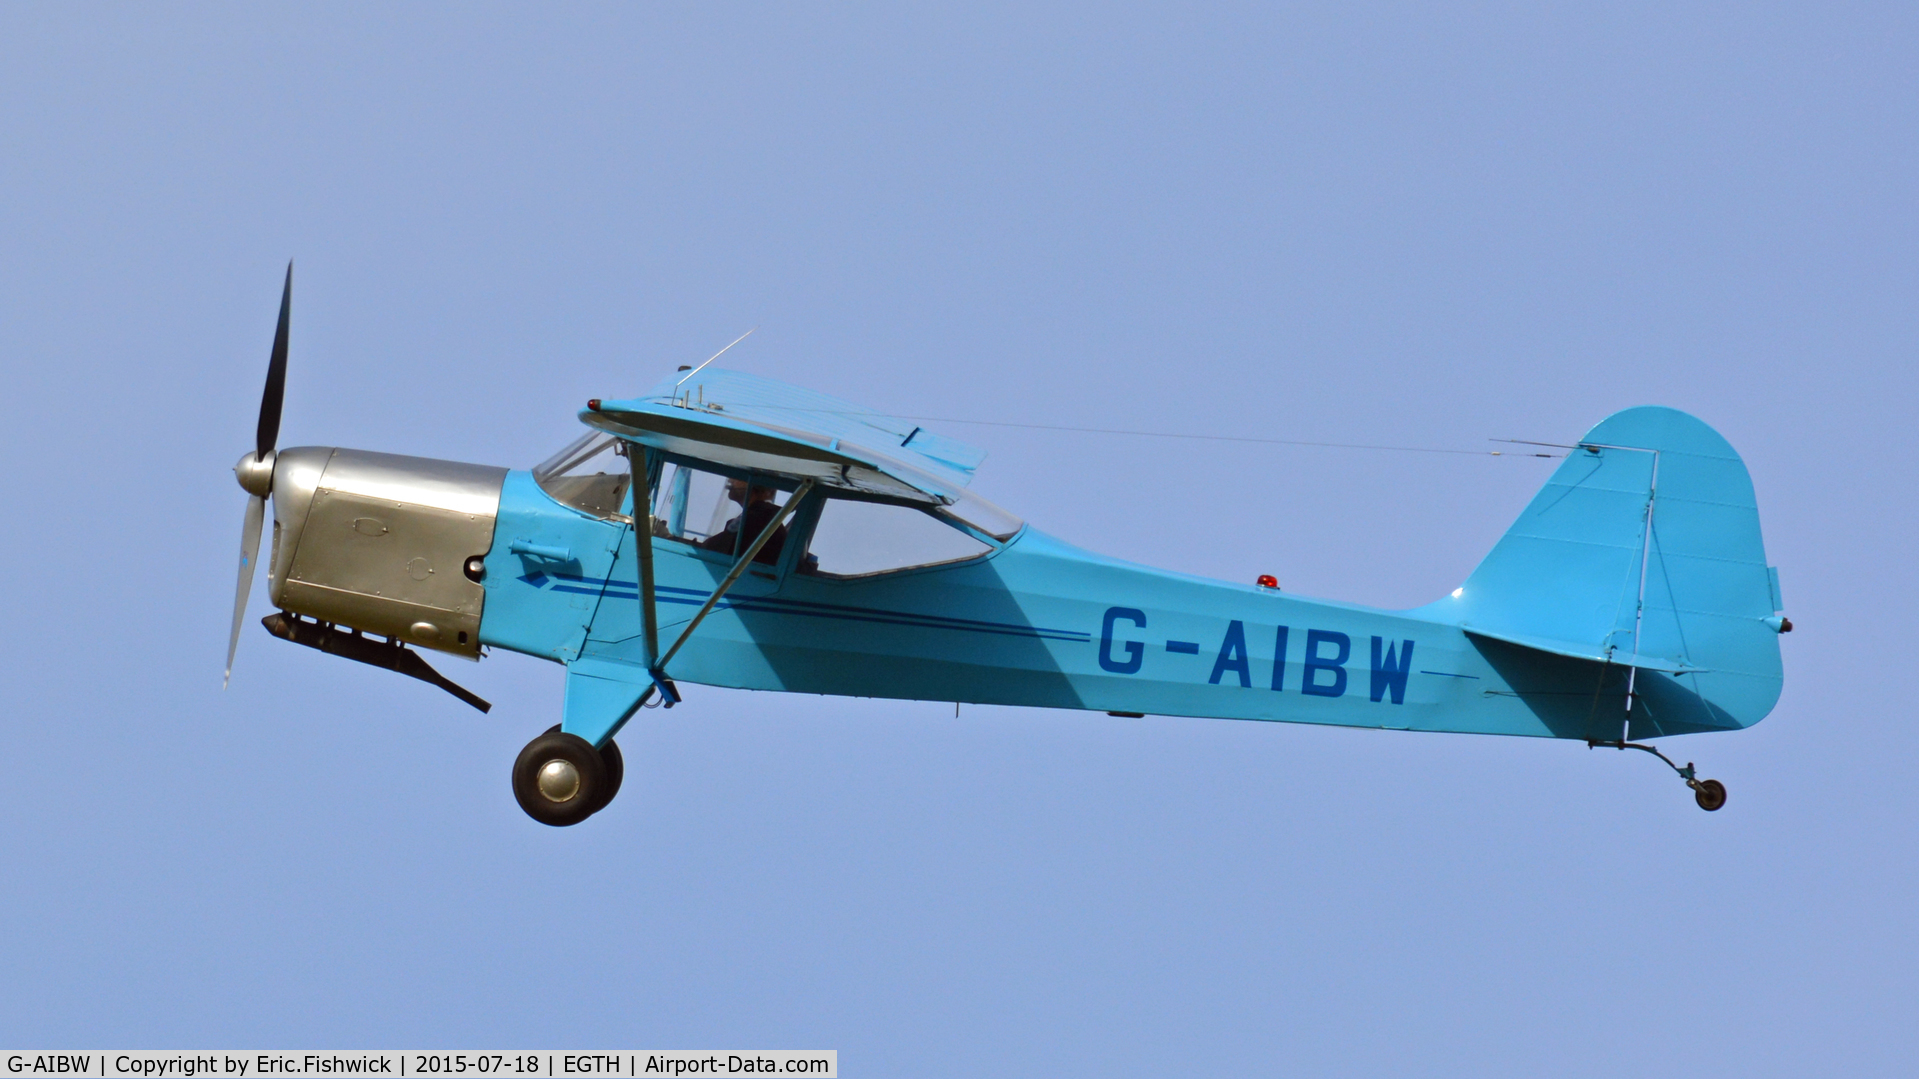 G-AIBW, 1946 Auster J-1N Alpha C/N 2158, 41. G-AIBW in display mode at Shuttleworth Best of British Airshow, July 2015